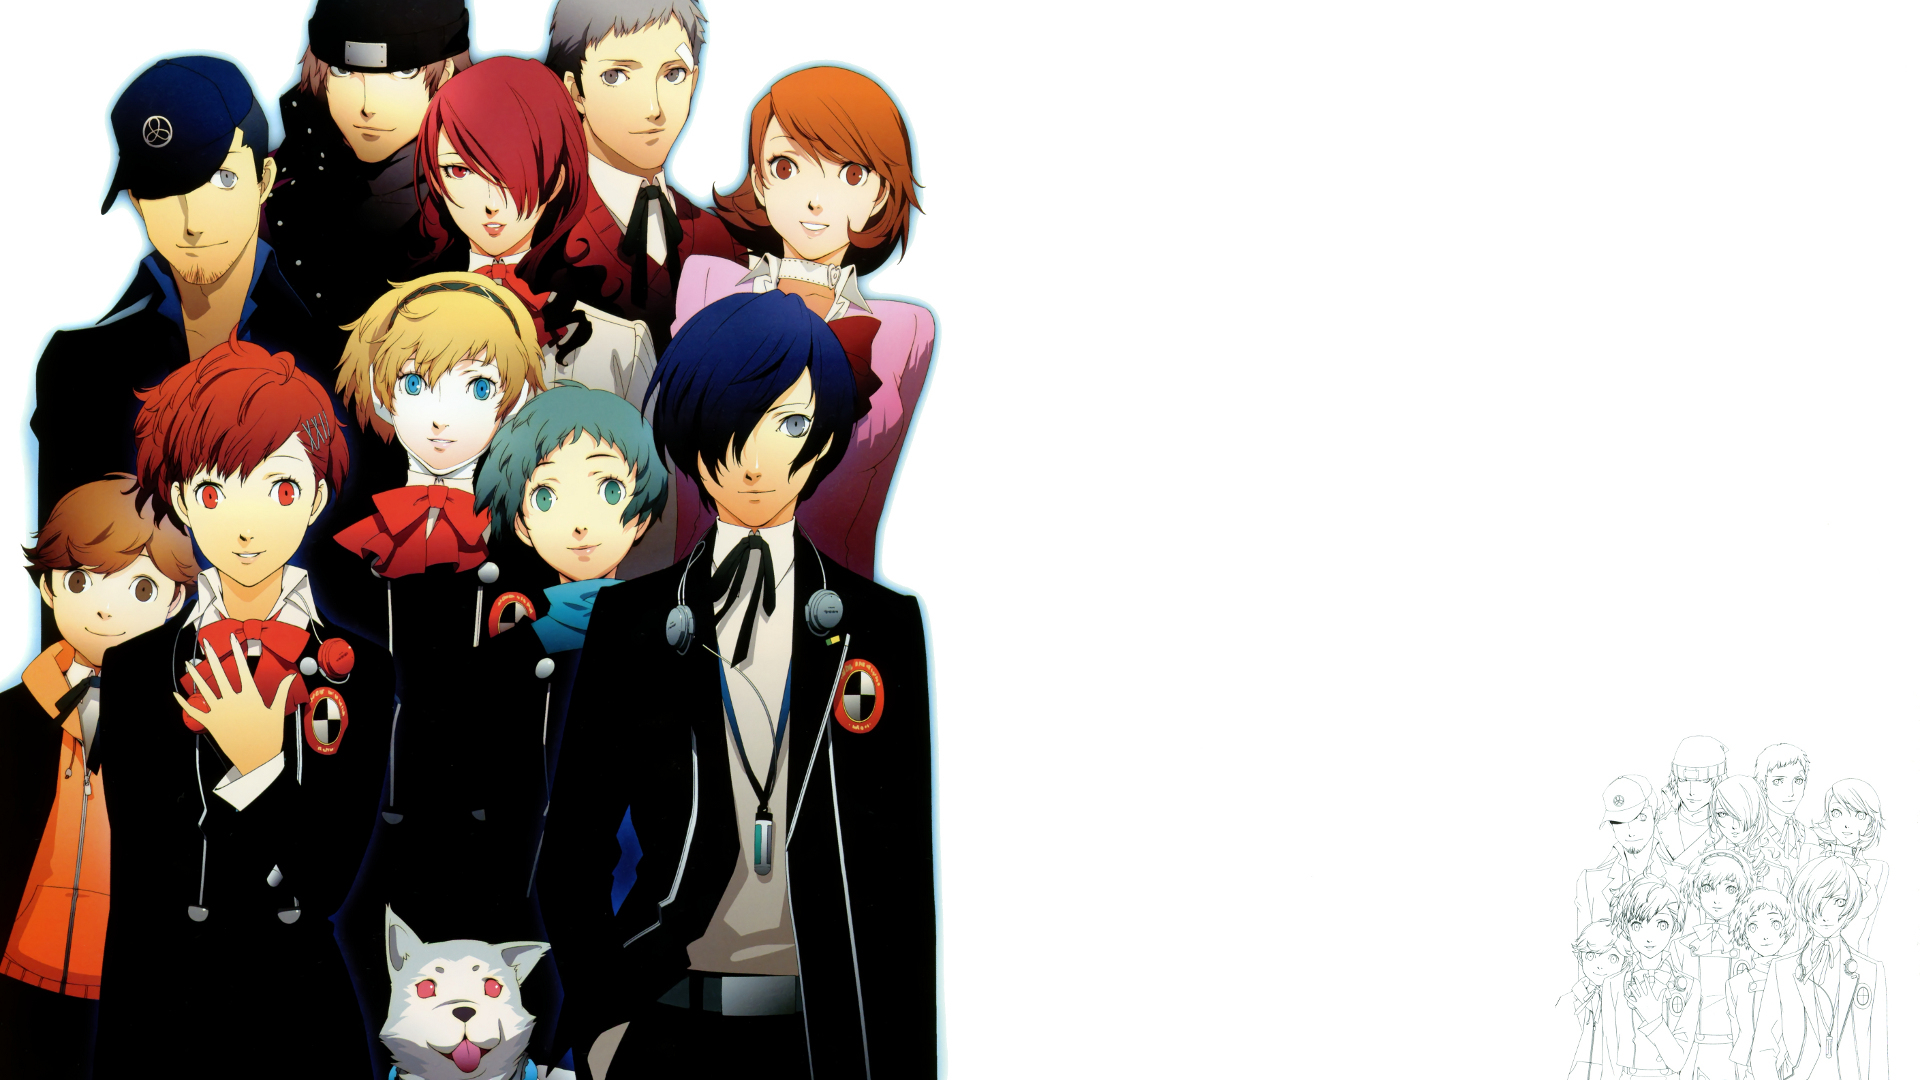 1920x1080 20+ Persona 3 Portable HD Wallpapers and Backgrounds